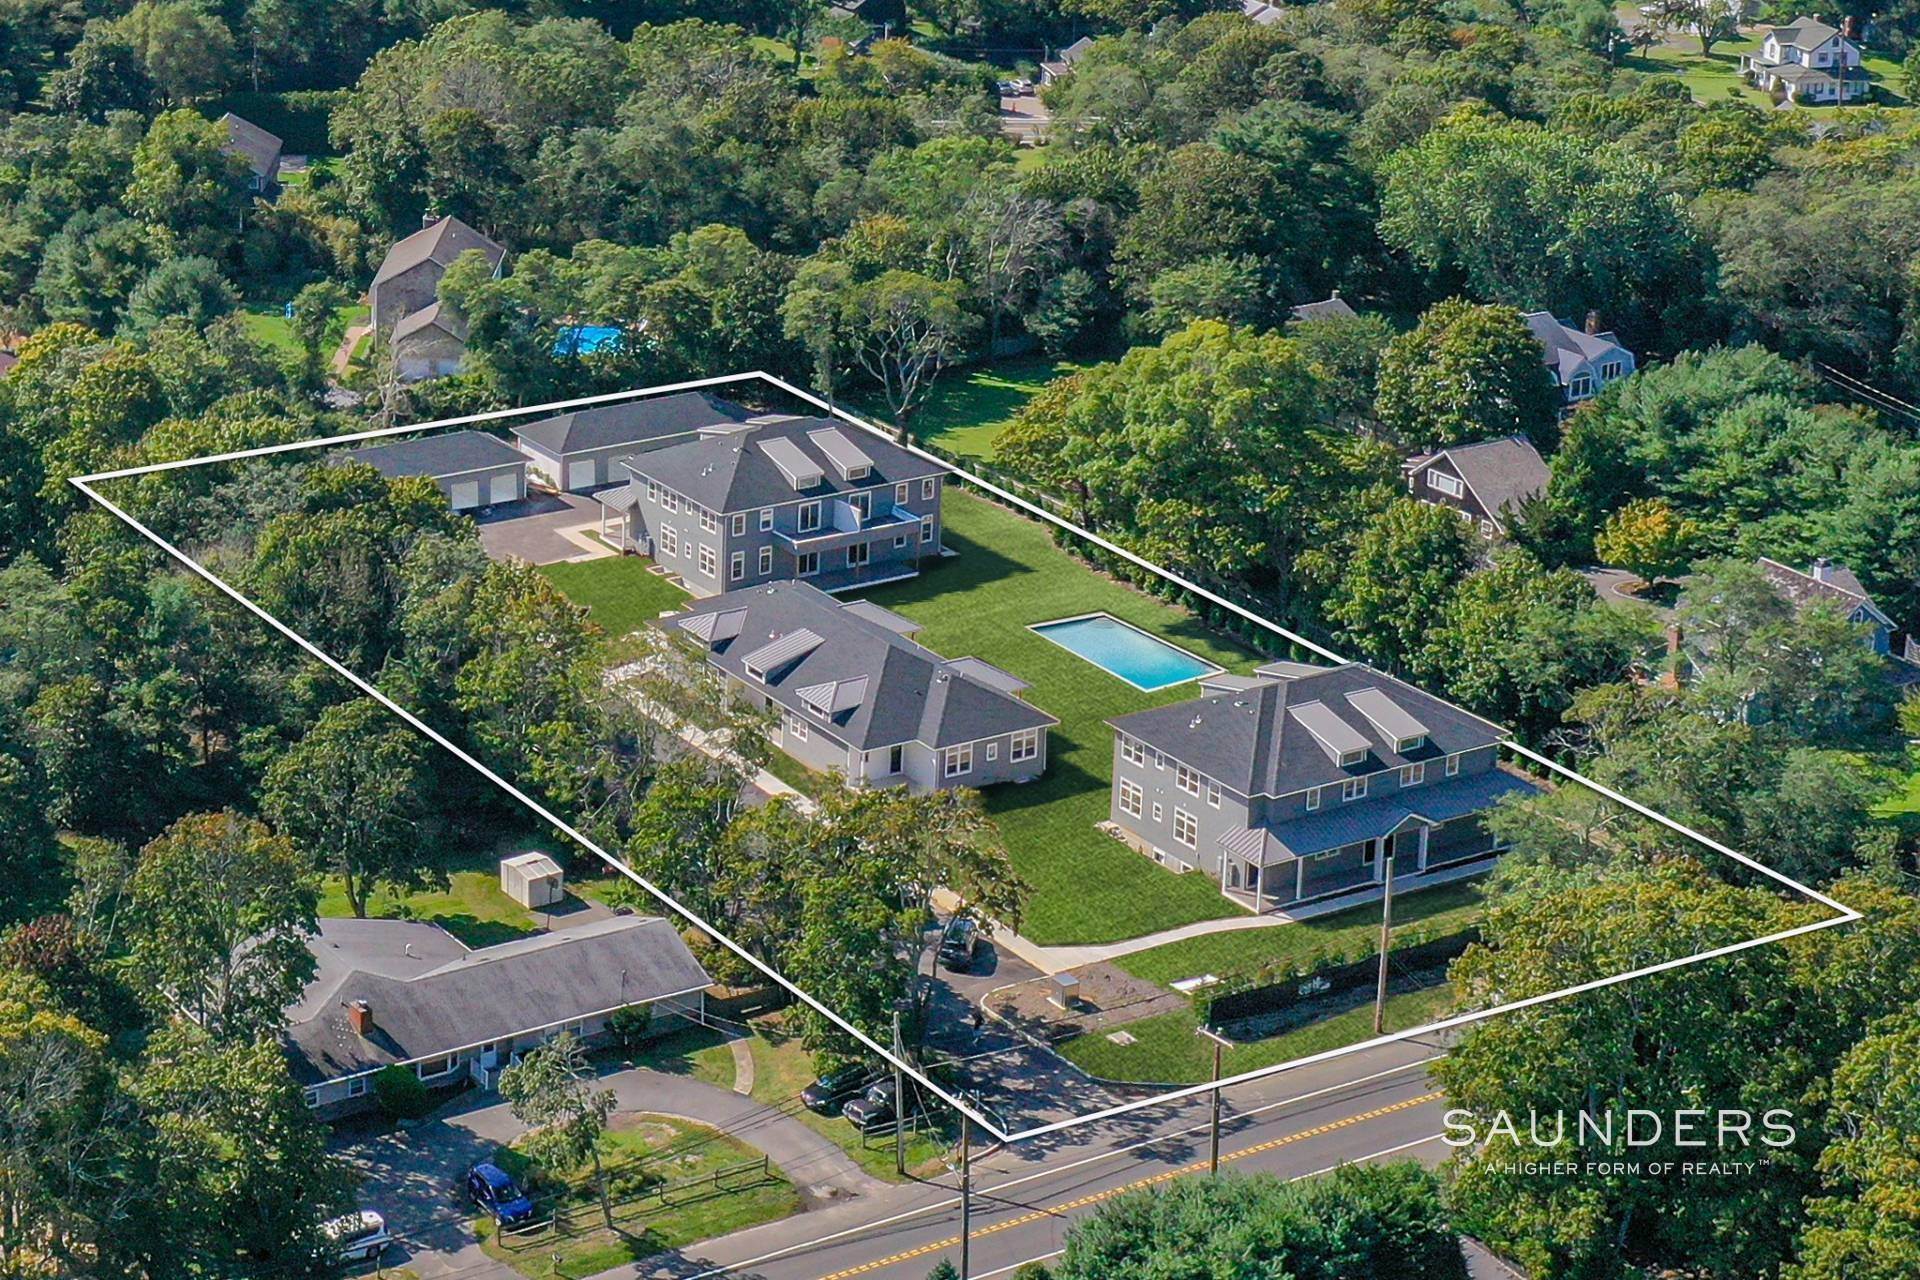 2. Townhouse for Sale at The Enclave - Westhampton 19 Montauk Highway, Unit 1, Westhampton, NY 11977